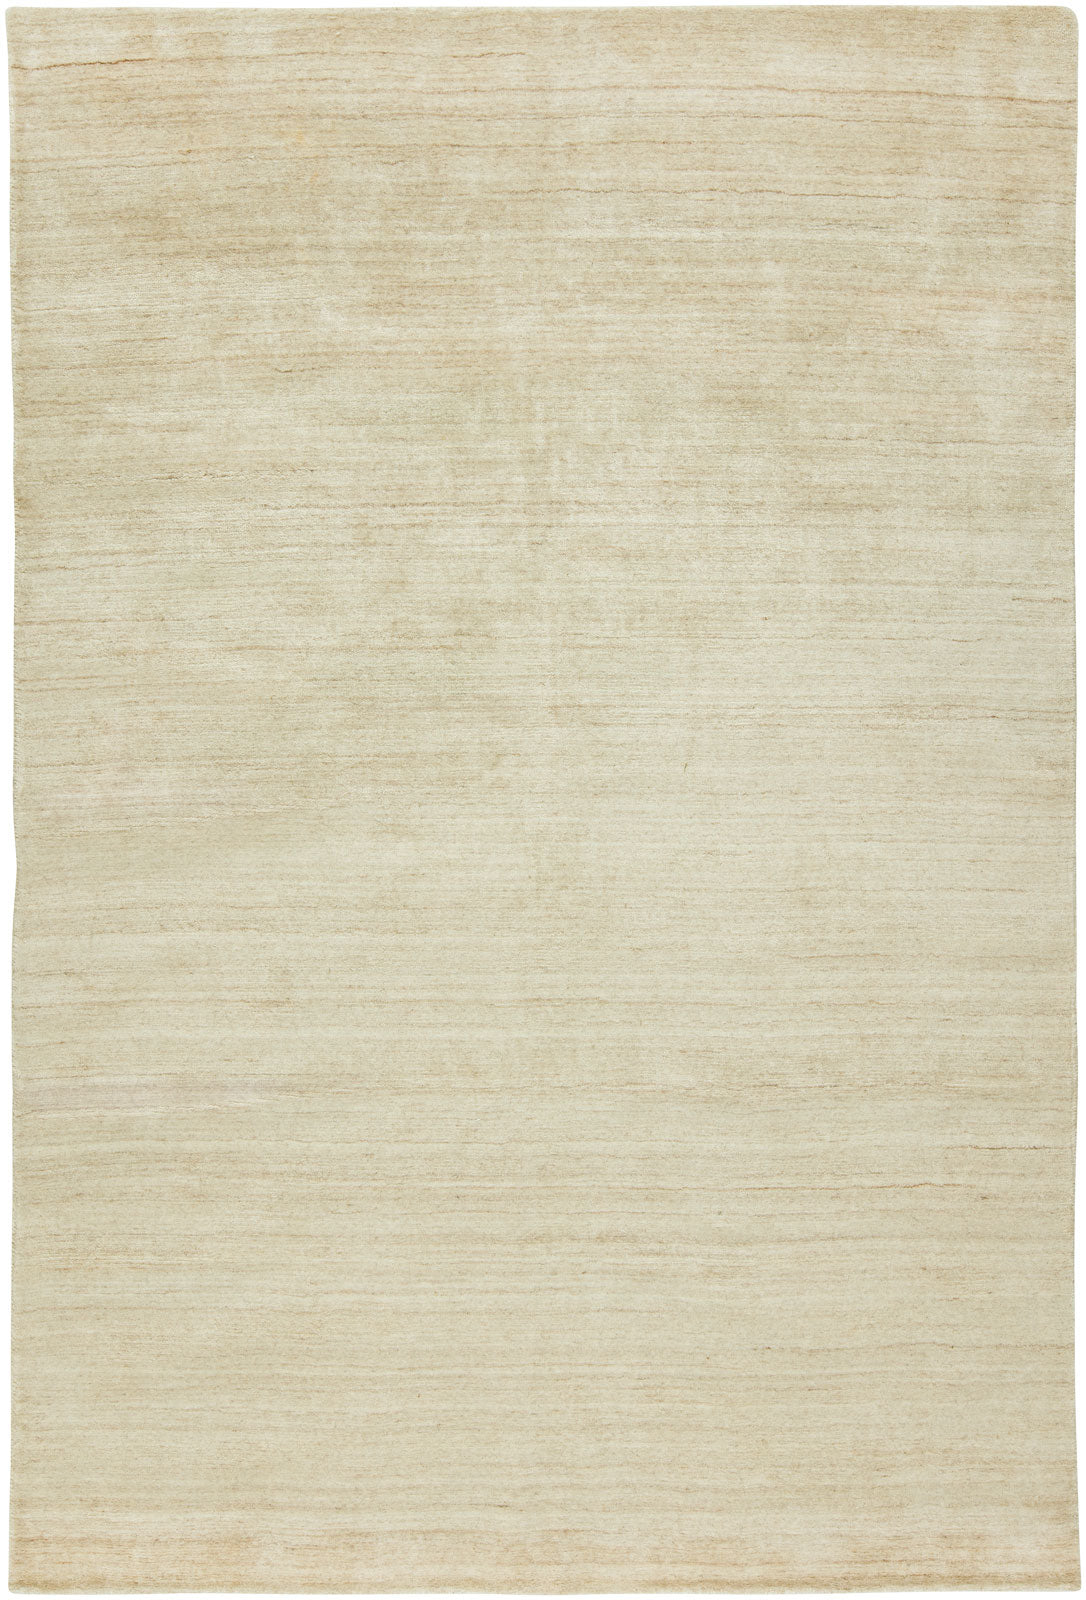 Meridian Chino 8 ft. x 10 ft. Area Rug